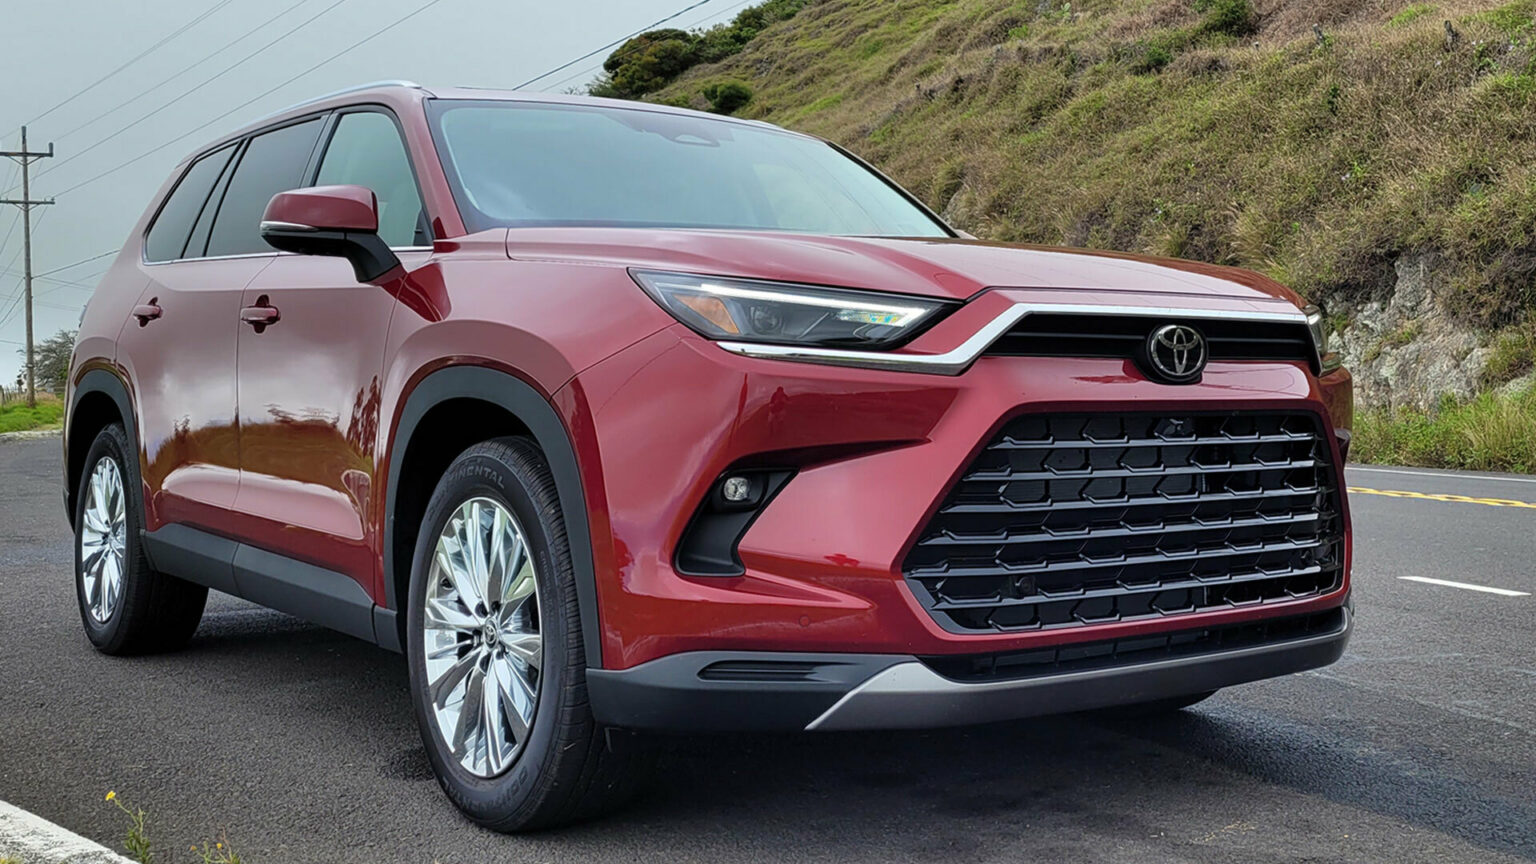 Grand Highlander Prime PHEV Unlikely As Toyota “Confident” In Existing